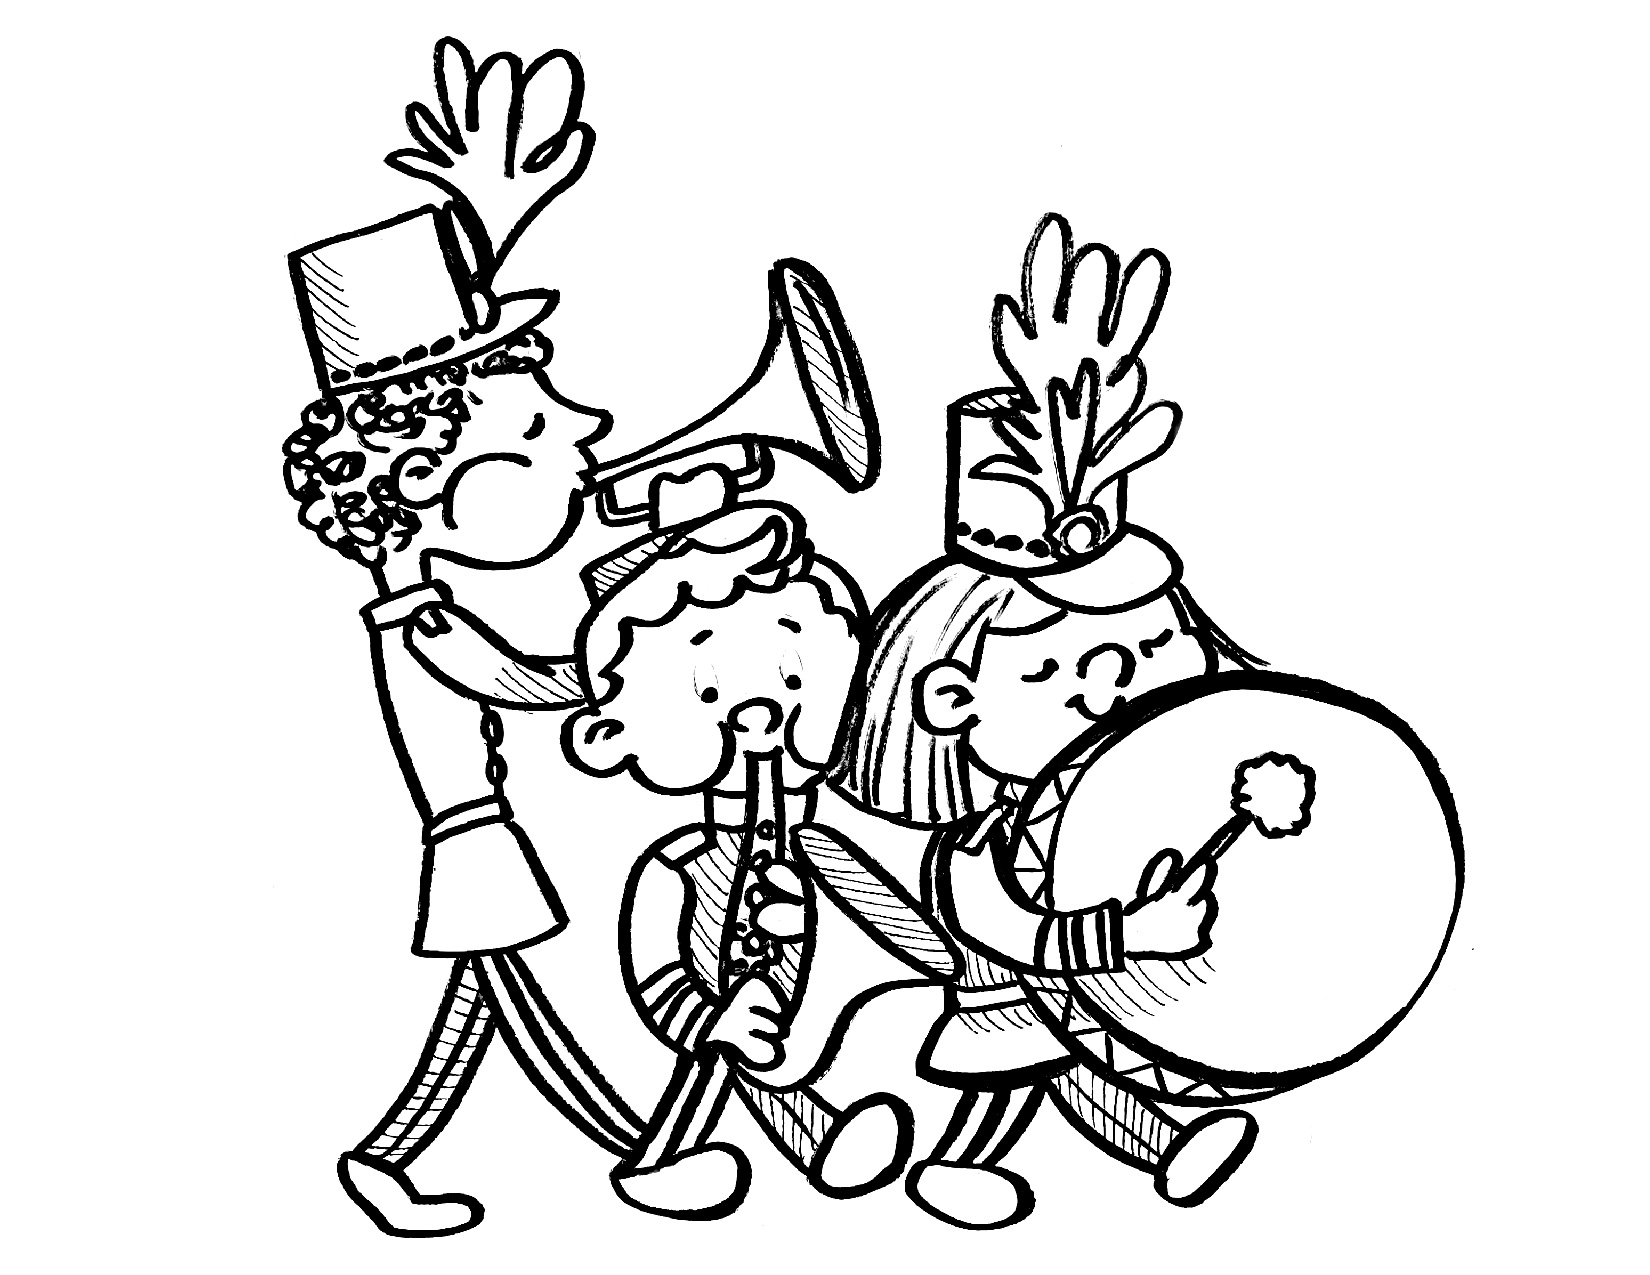 Coloring Page from The Little Book of Creativity with a band